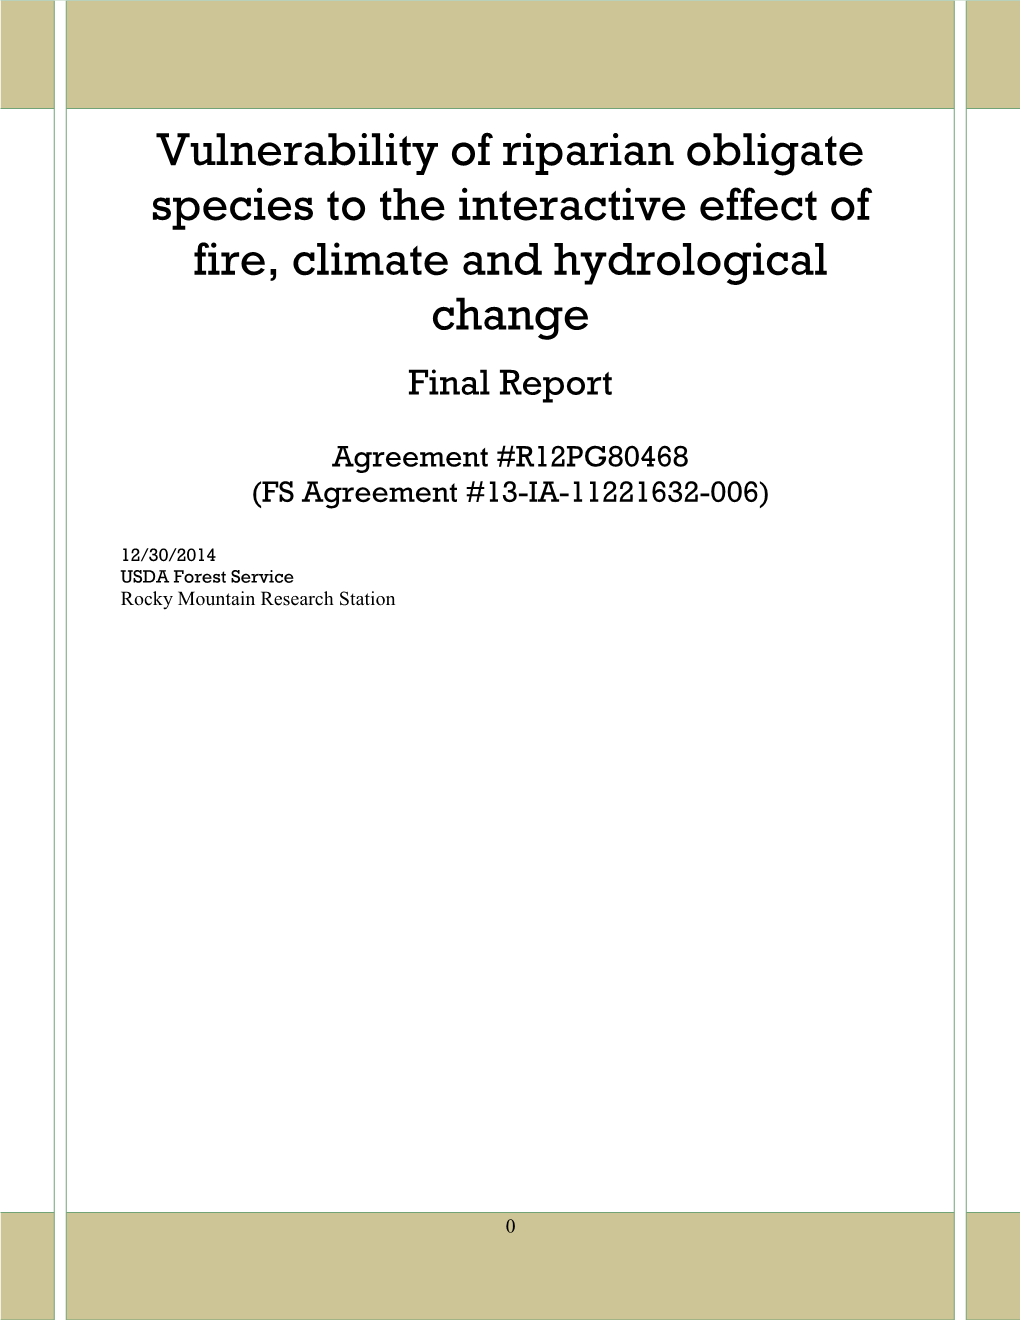 Vulnerability of Riparian Obligate Species to the Interactive Effect of Fire, Climate and Hydrological Change Final Report